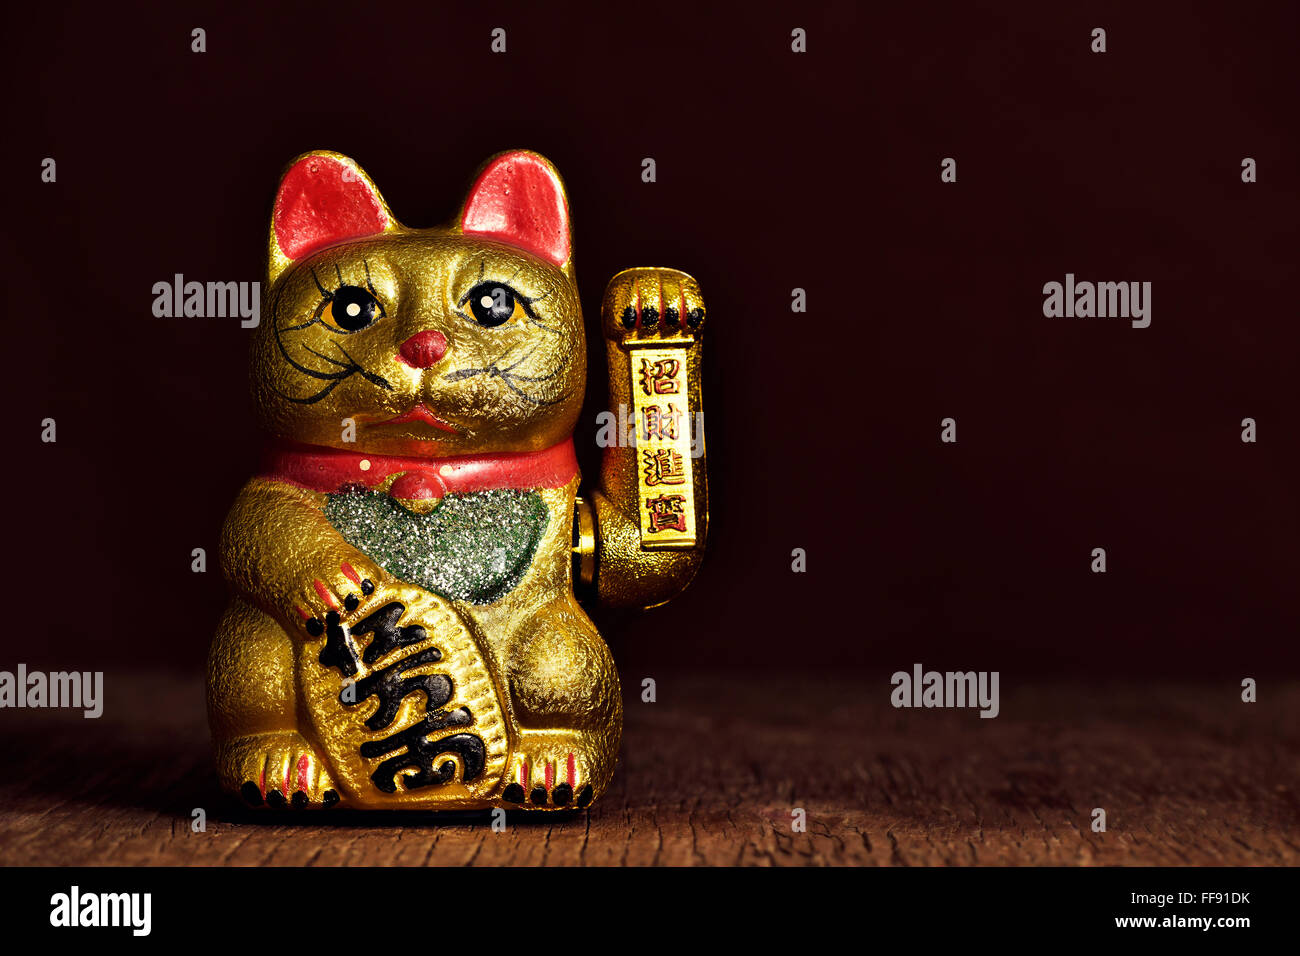 a golden chinese lucky cat with its left paw raised, on a rustic wooden surface Stock Photo